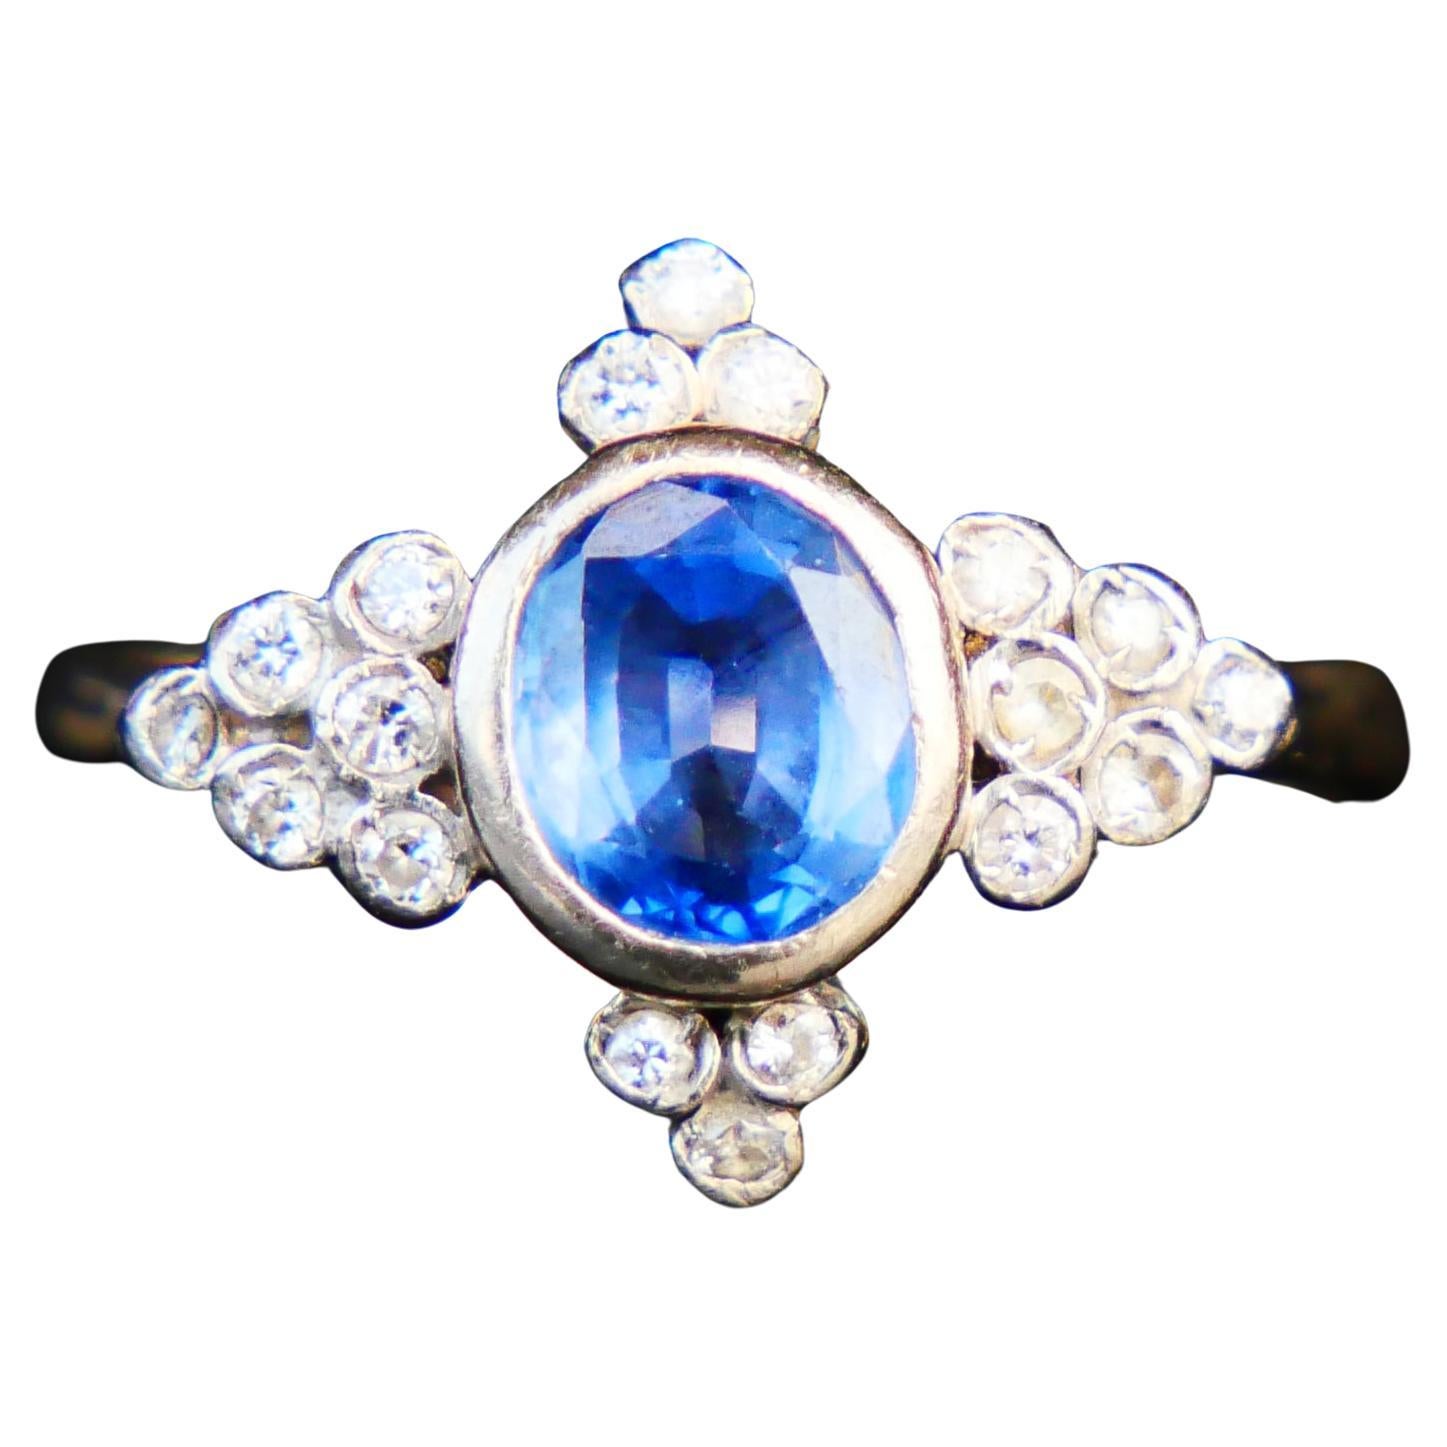 German Ring from 1930s in solid 18K White Gold with natural Cornflower Blue Sapphire and Diamonds.

Natural transparent Ceylon Sapphire of old European oval cut , color is light Blue / VS , measures 6.5 mm x 5.5 mm x 3.8 mm mm deep / ca. 1.2 ct